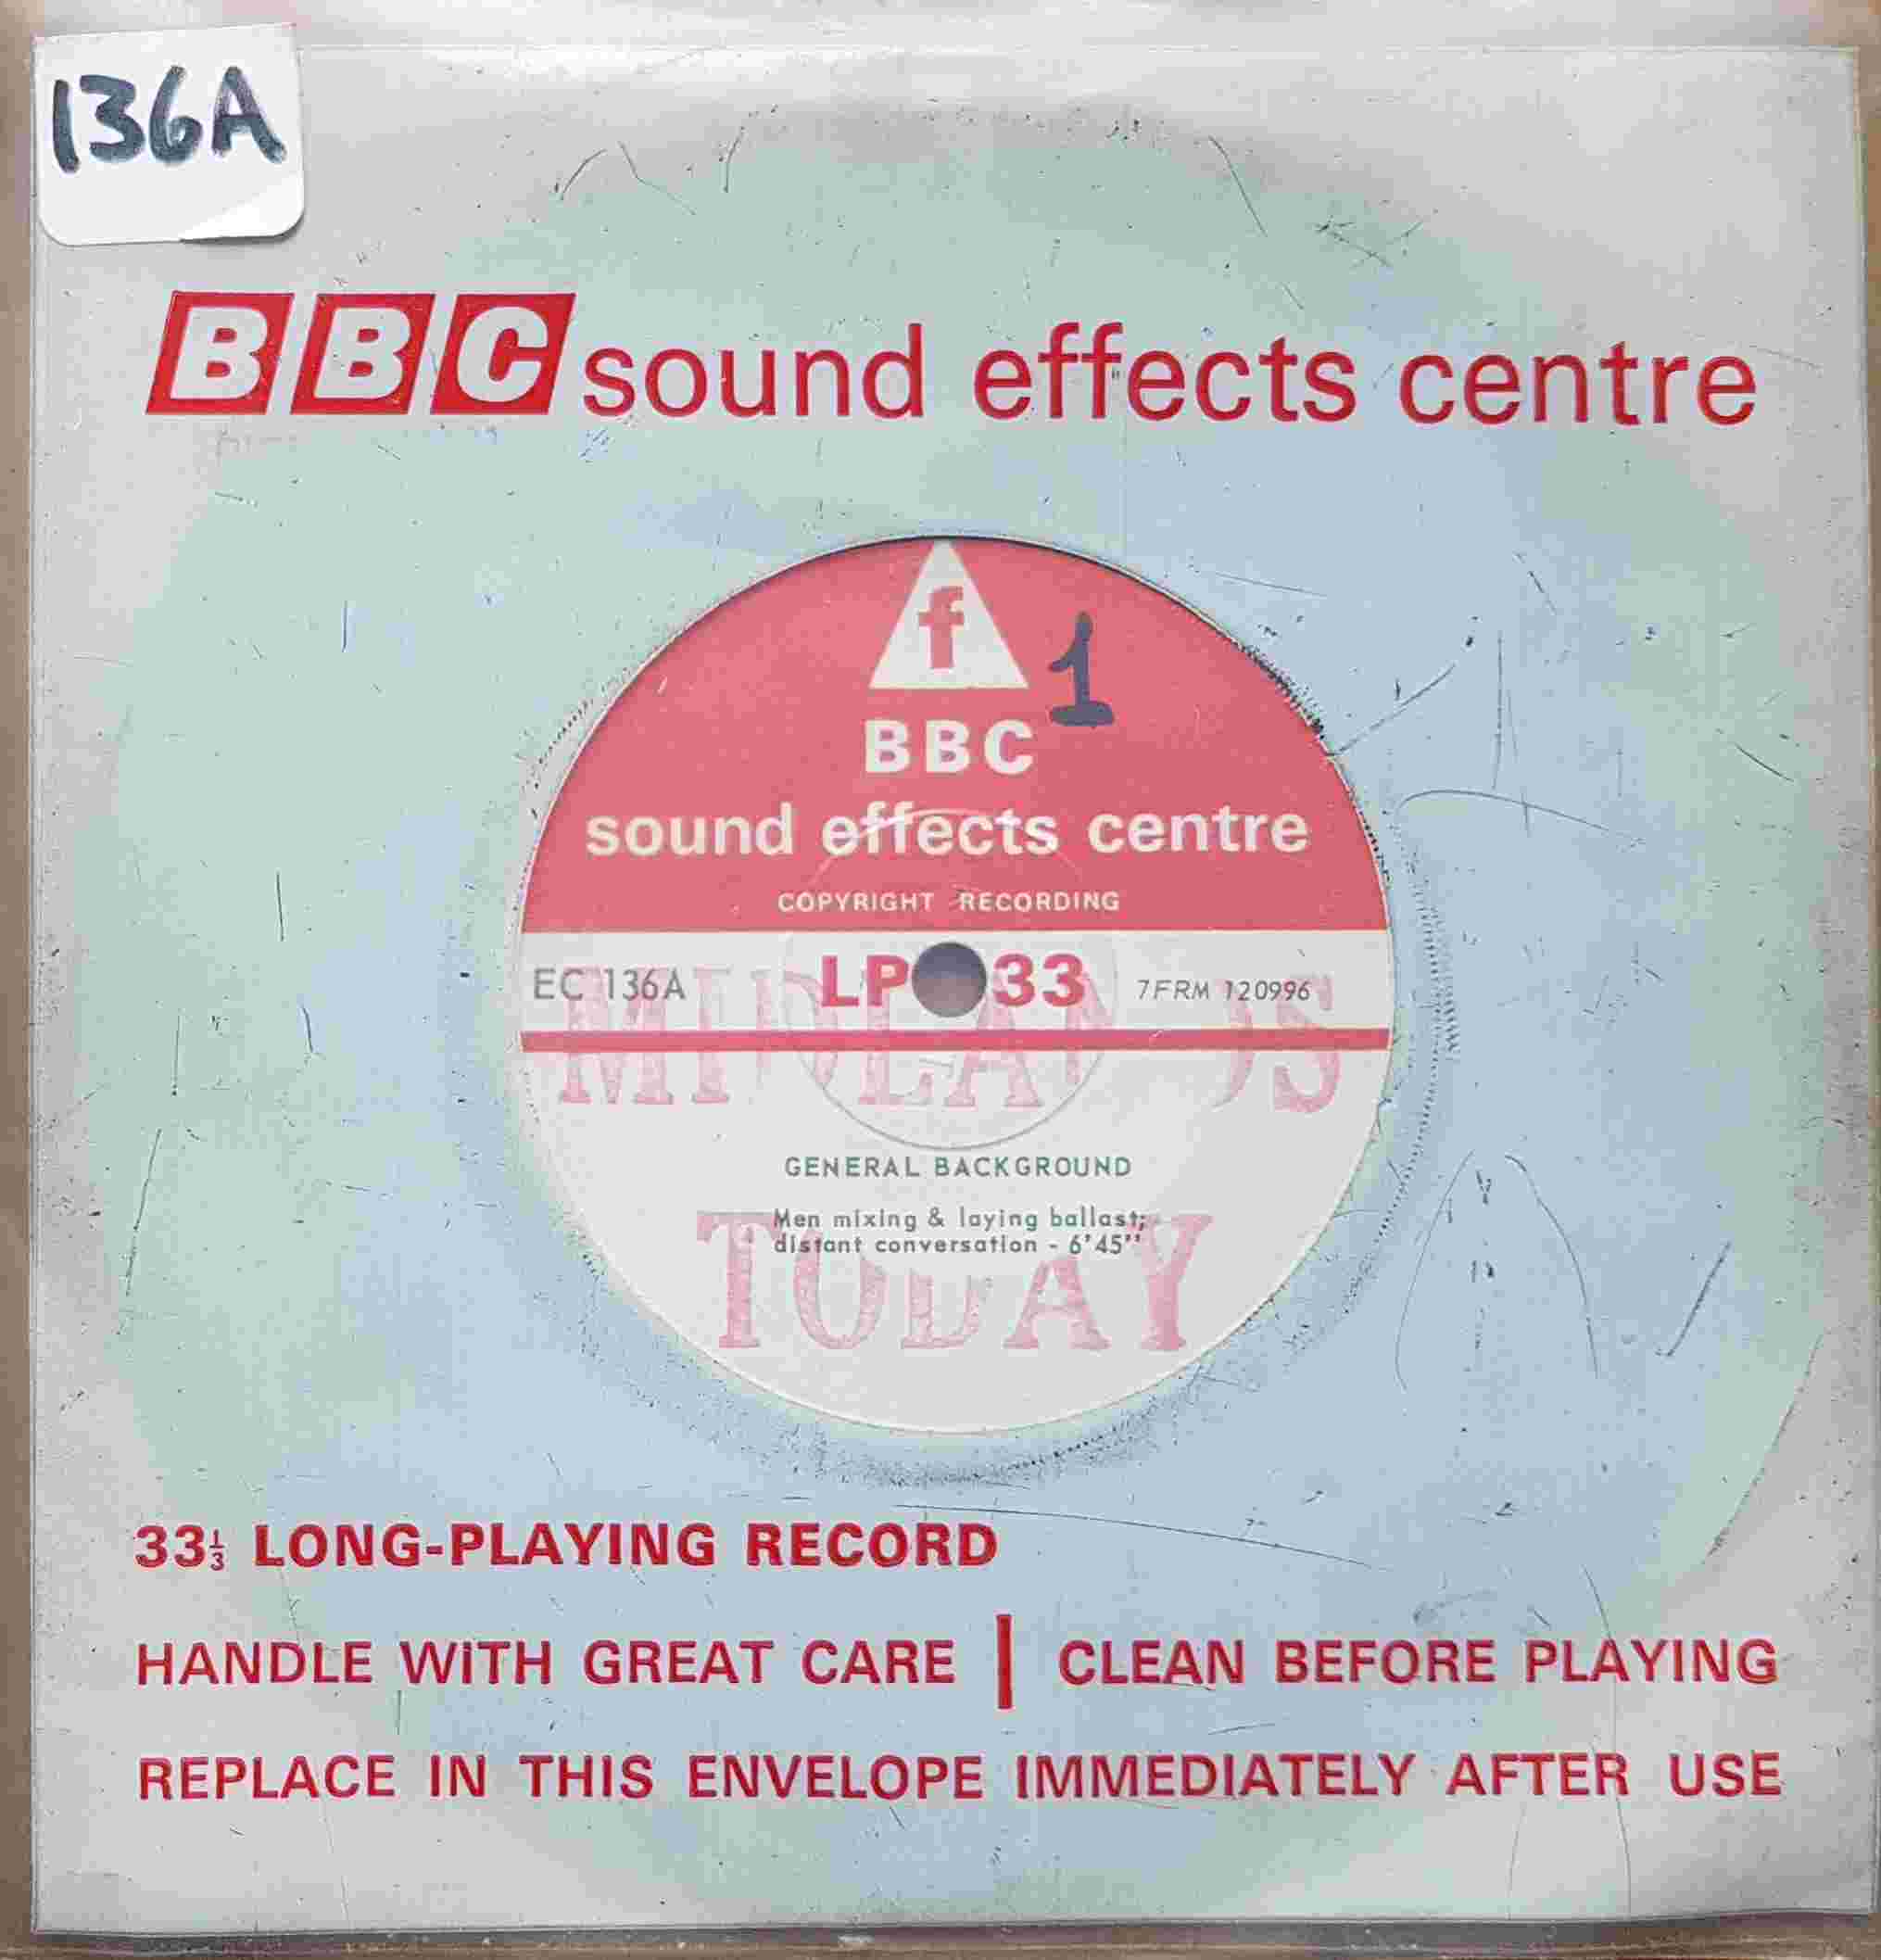 Picture of EC 136A General background by artist Not registered from the BBC singles - Records and Tapes library